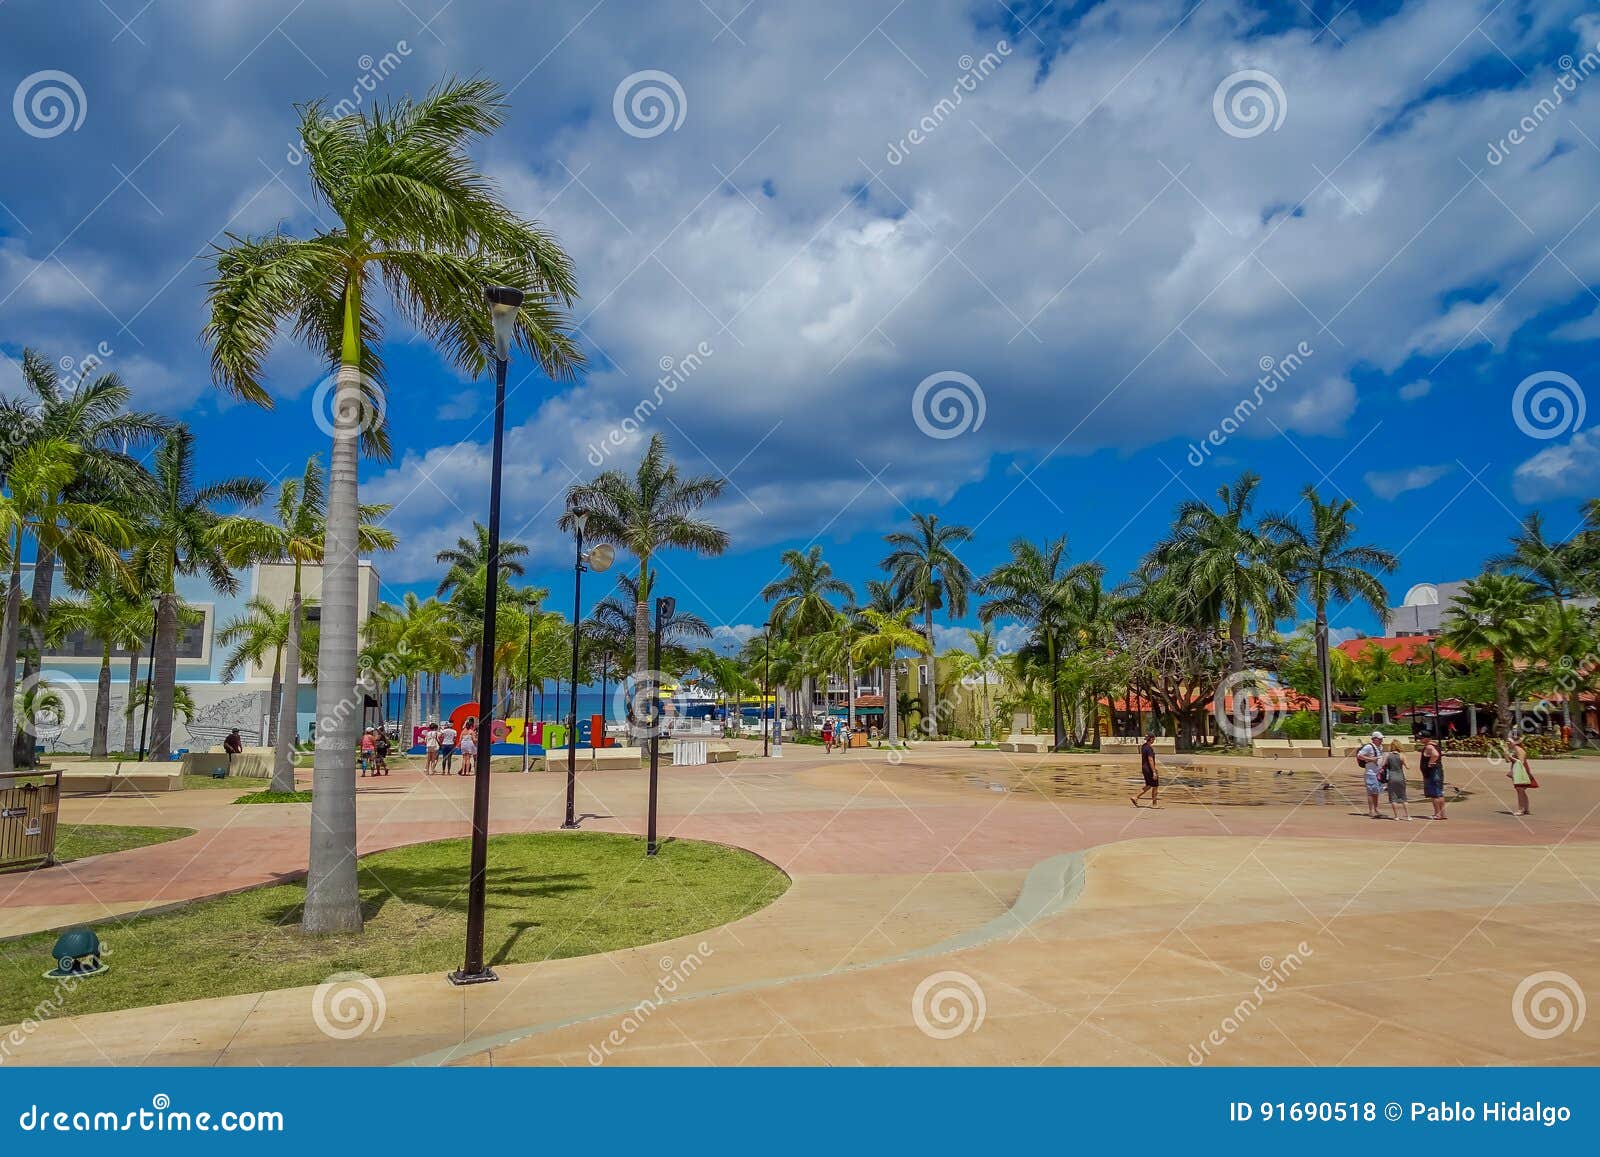 plaza located in dowtown in the colorful cozumel